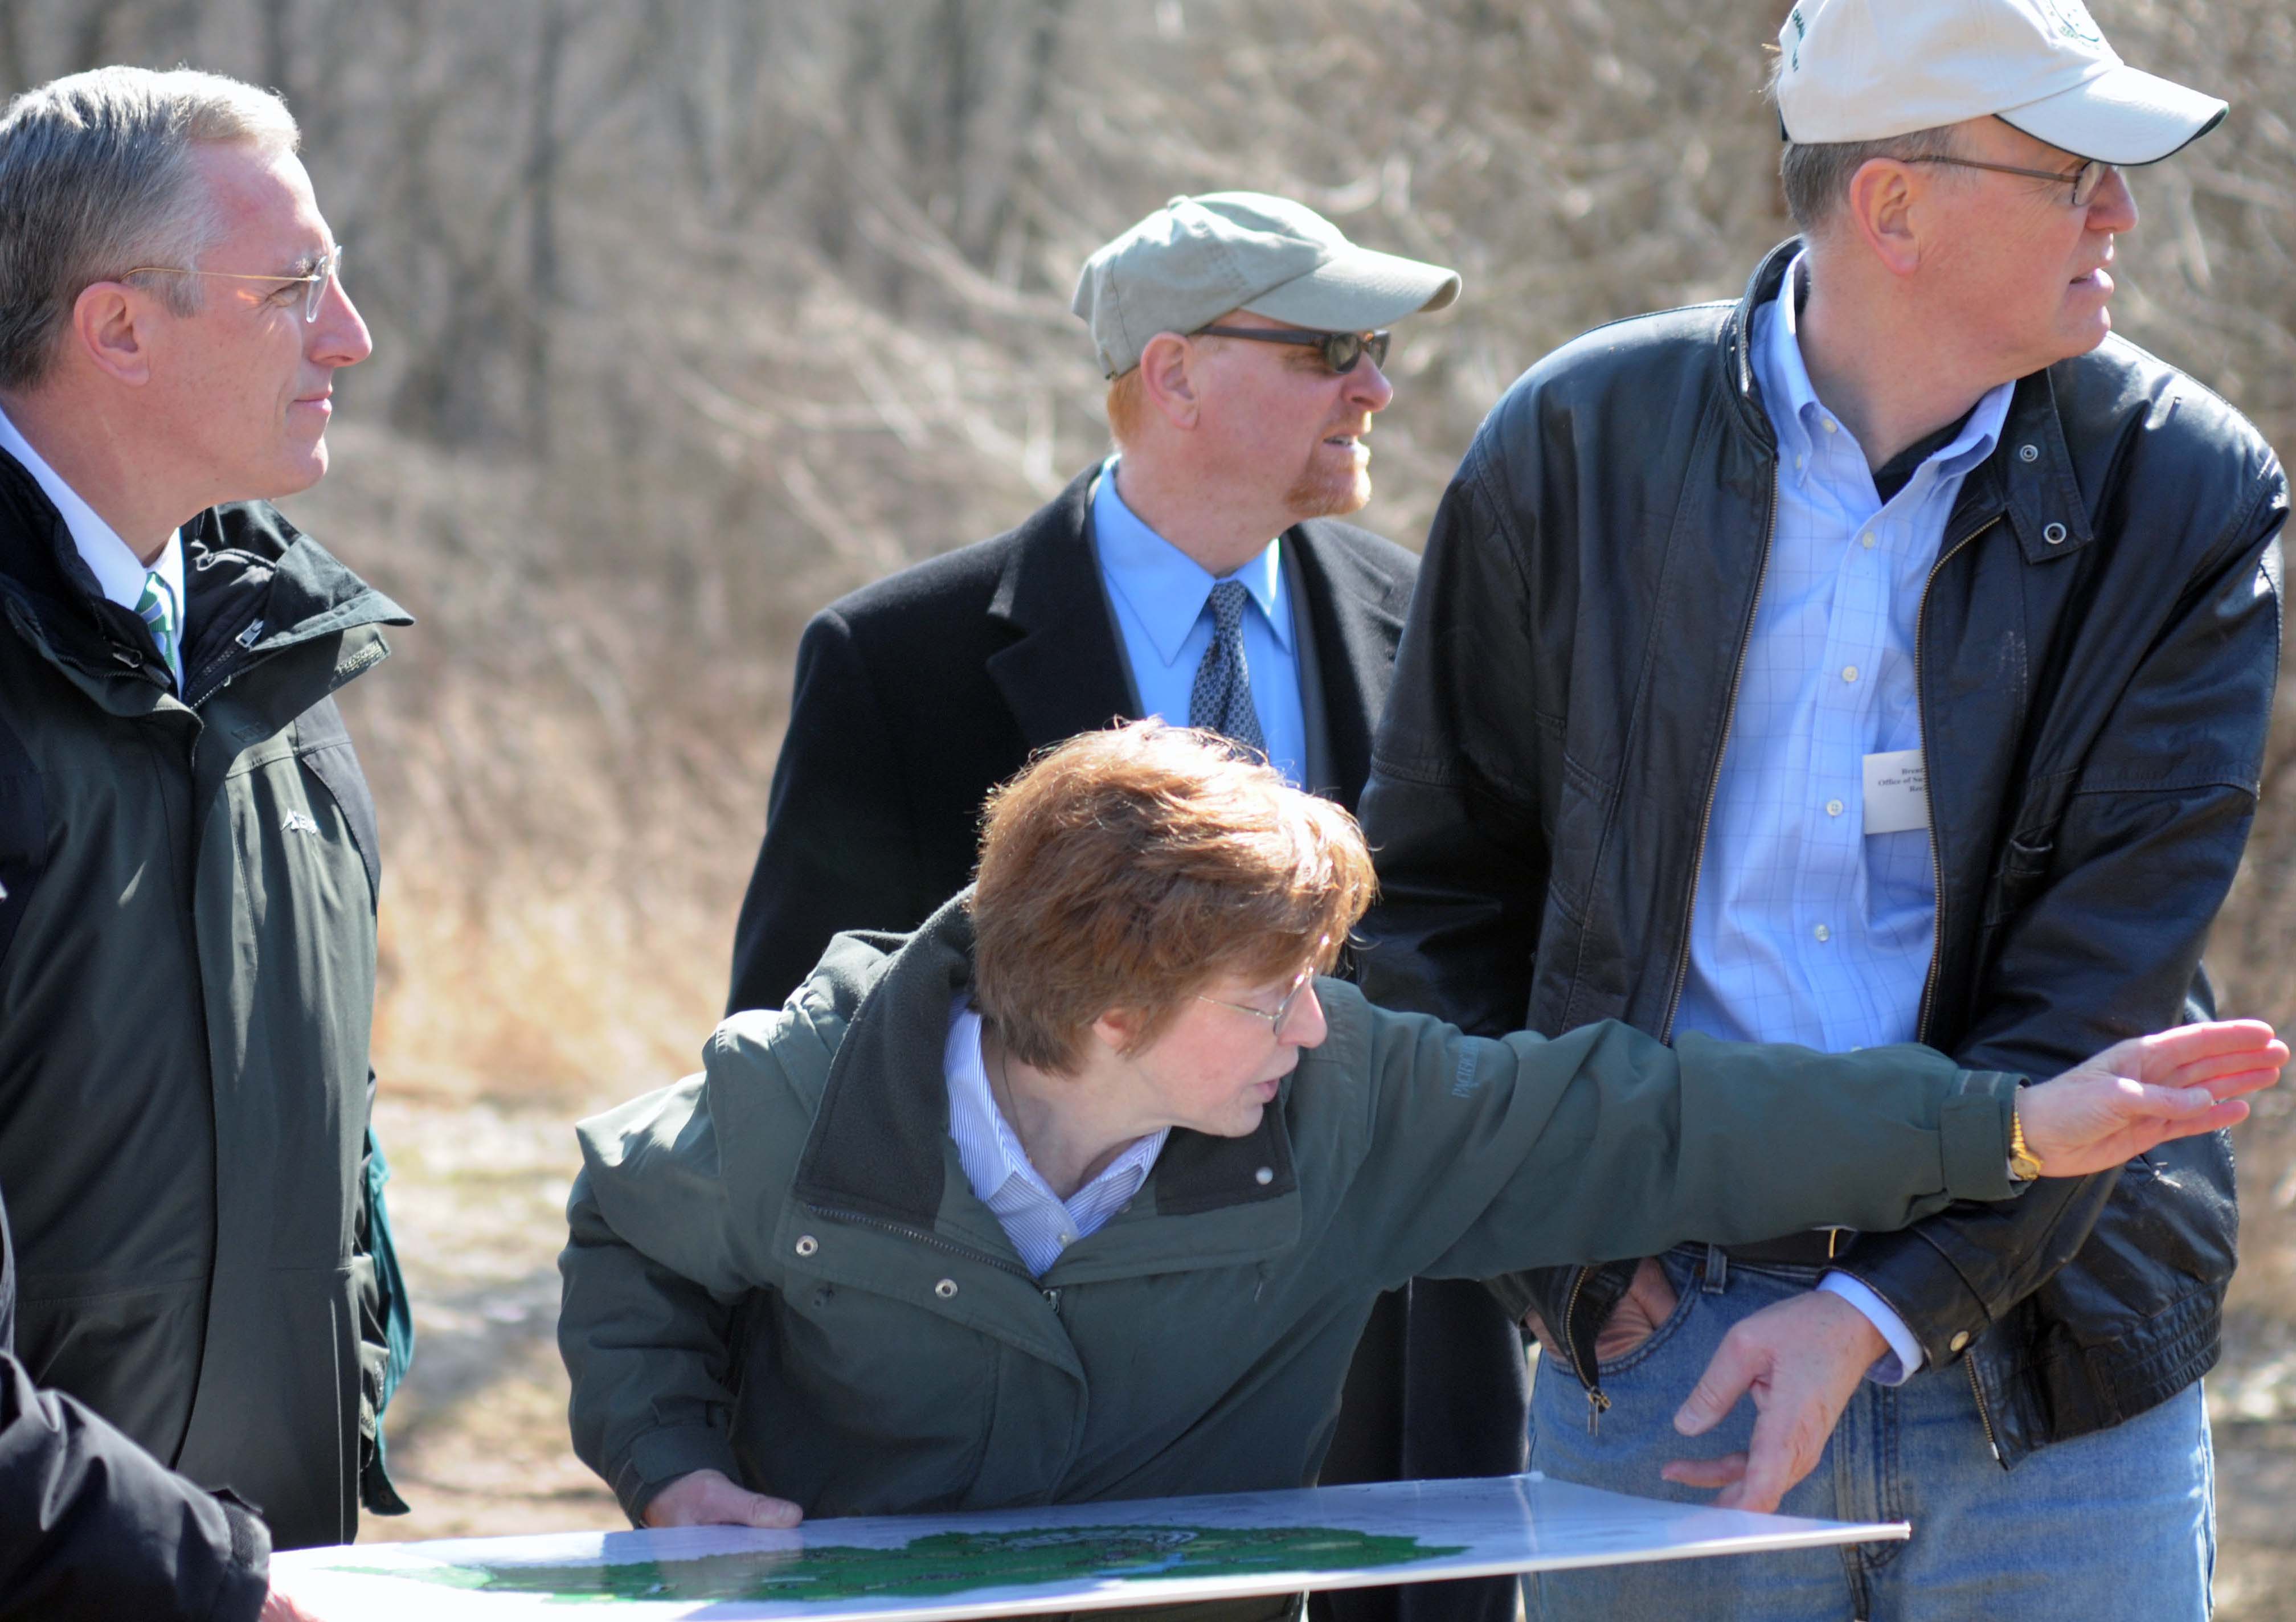 Lindsey Totten of the Botanic Garden of Western Pennsylvania points out future features of the Garden to U.S. Congressman Tim Murphy (left), Andrew G. Baechle, Director of the Allegheny County Parks Department (center), and OSM Director Brent Wahlquist (right).